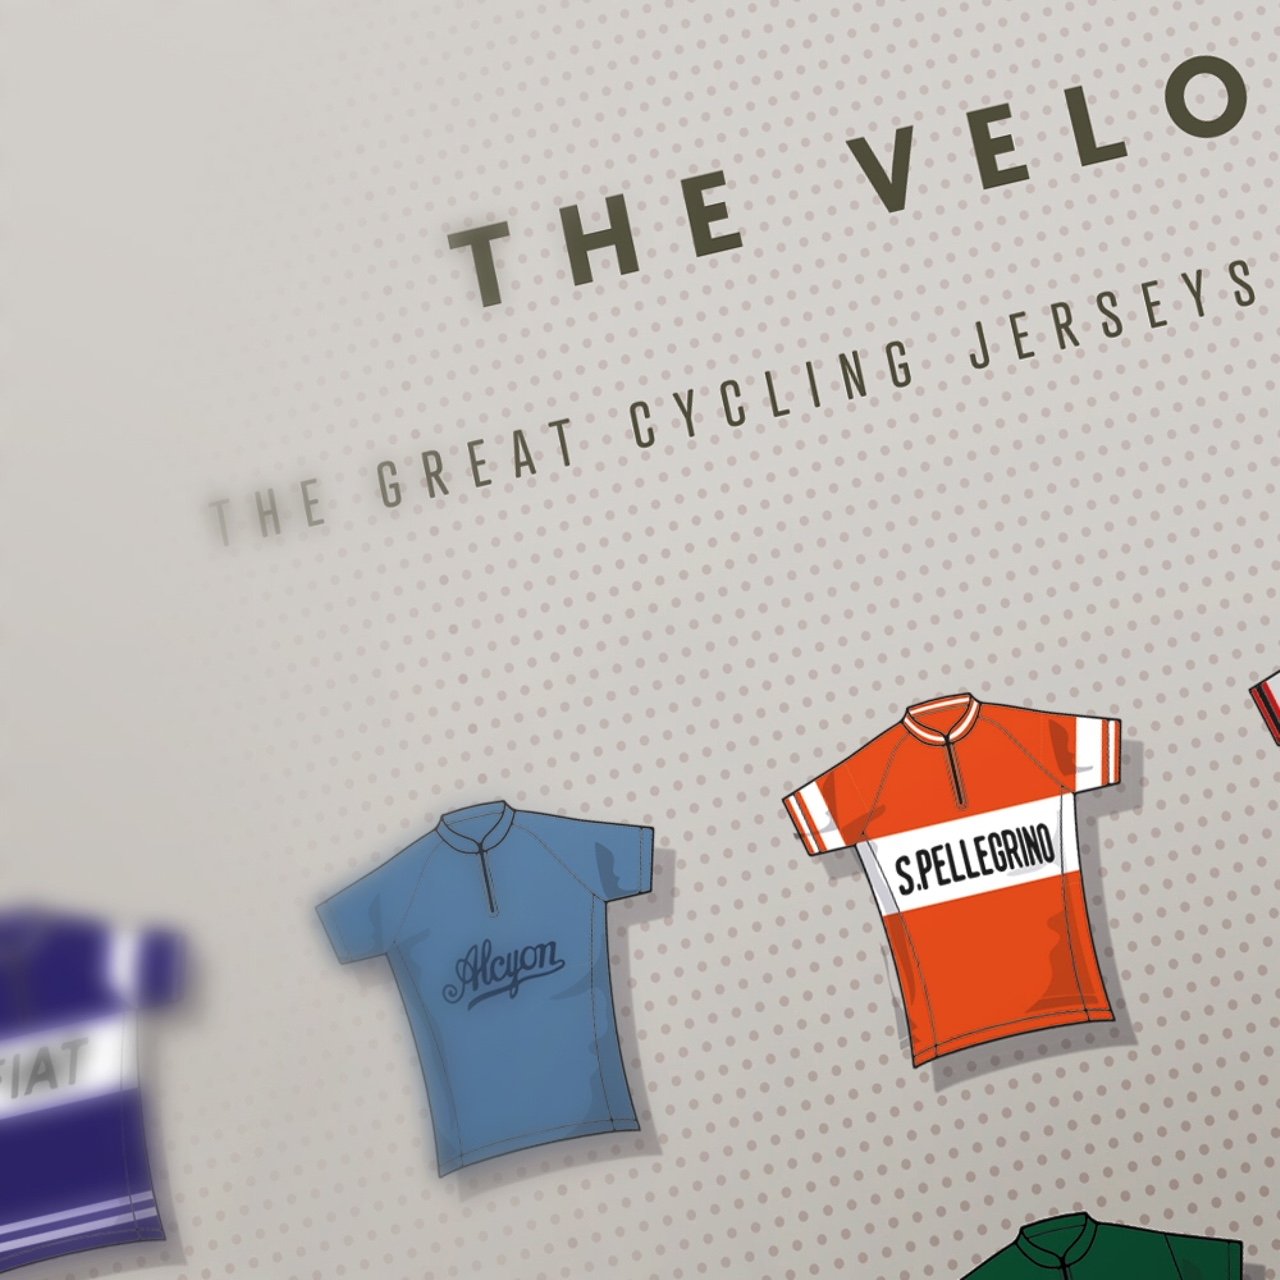 The Velorati - Cycling Jersey Poster Print. For lovers of retro cycling jerseys! This contemporary cycling poster print details the great cycling jerseys through the ages. Including - Eddy Merckx Molteni, Faema, Peugeo and Fiat, Fausto Coppi Bianchi, Raymond Poulidor Hutchinson and Bernard Hinault Renault Elf and La Vie Claire.